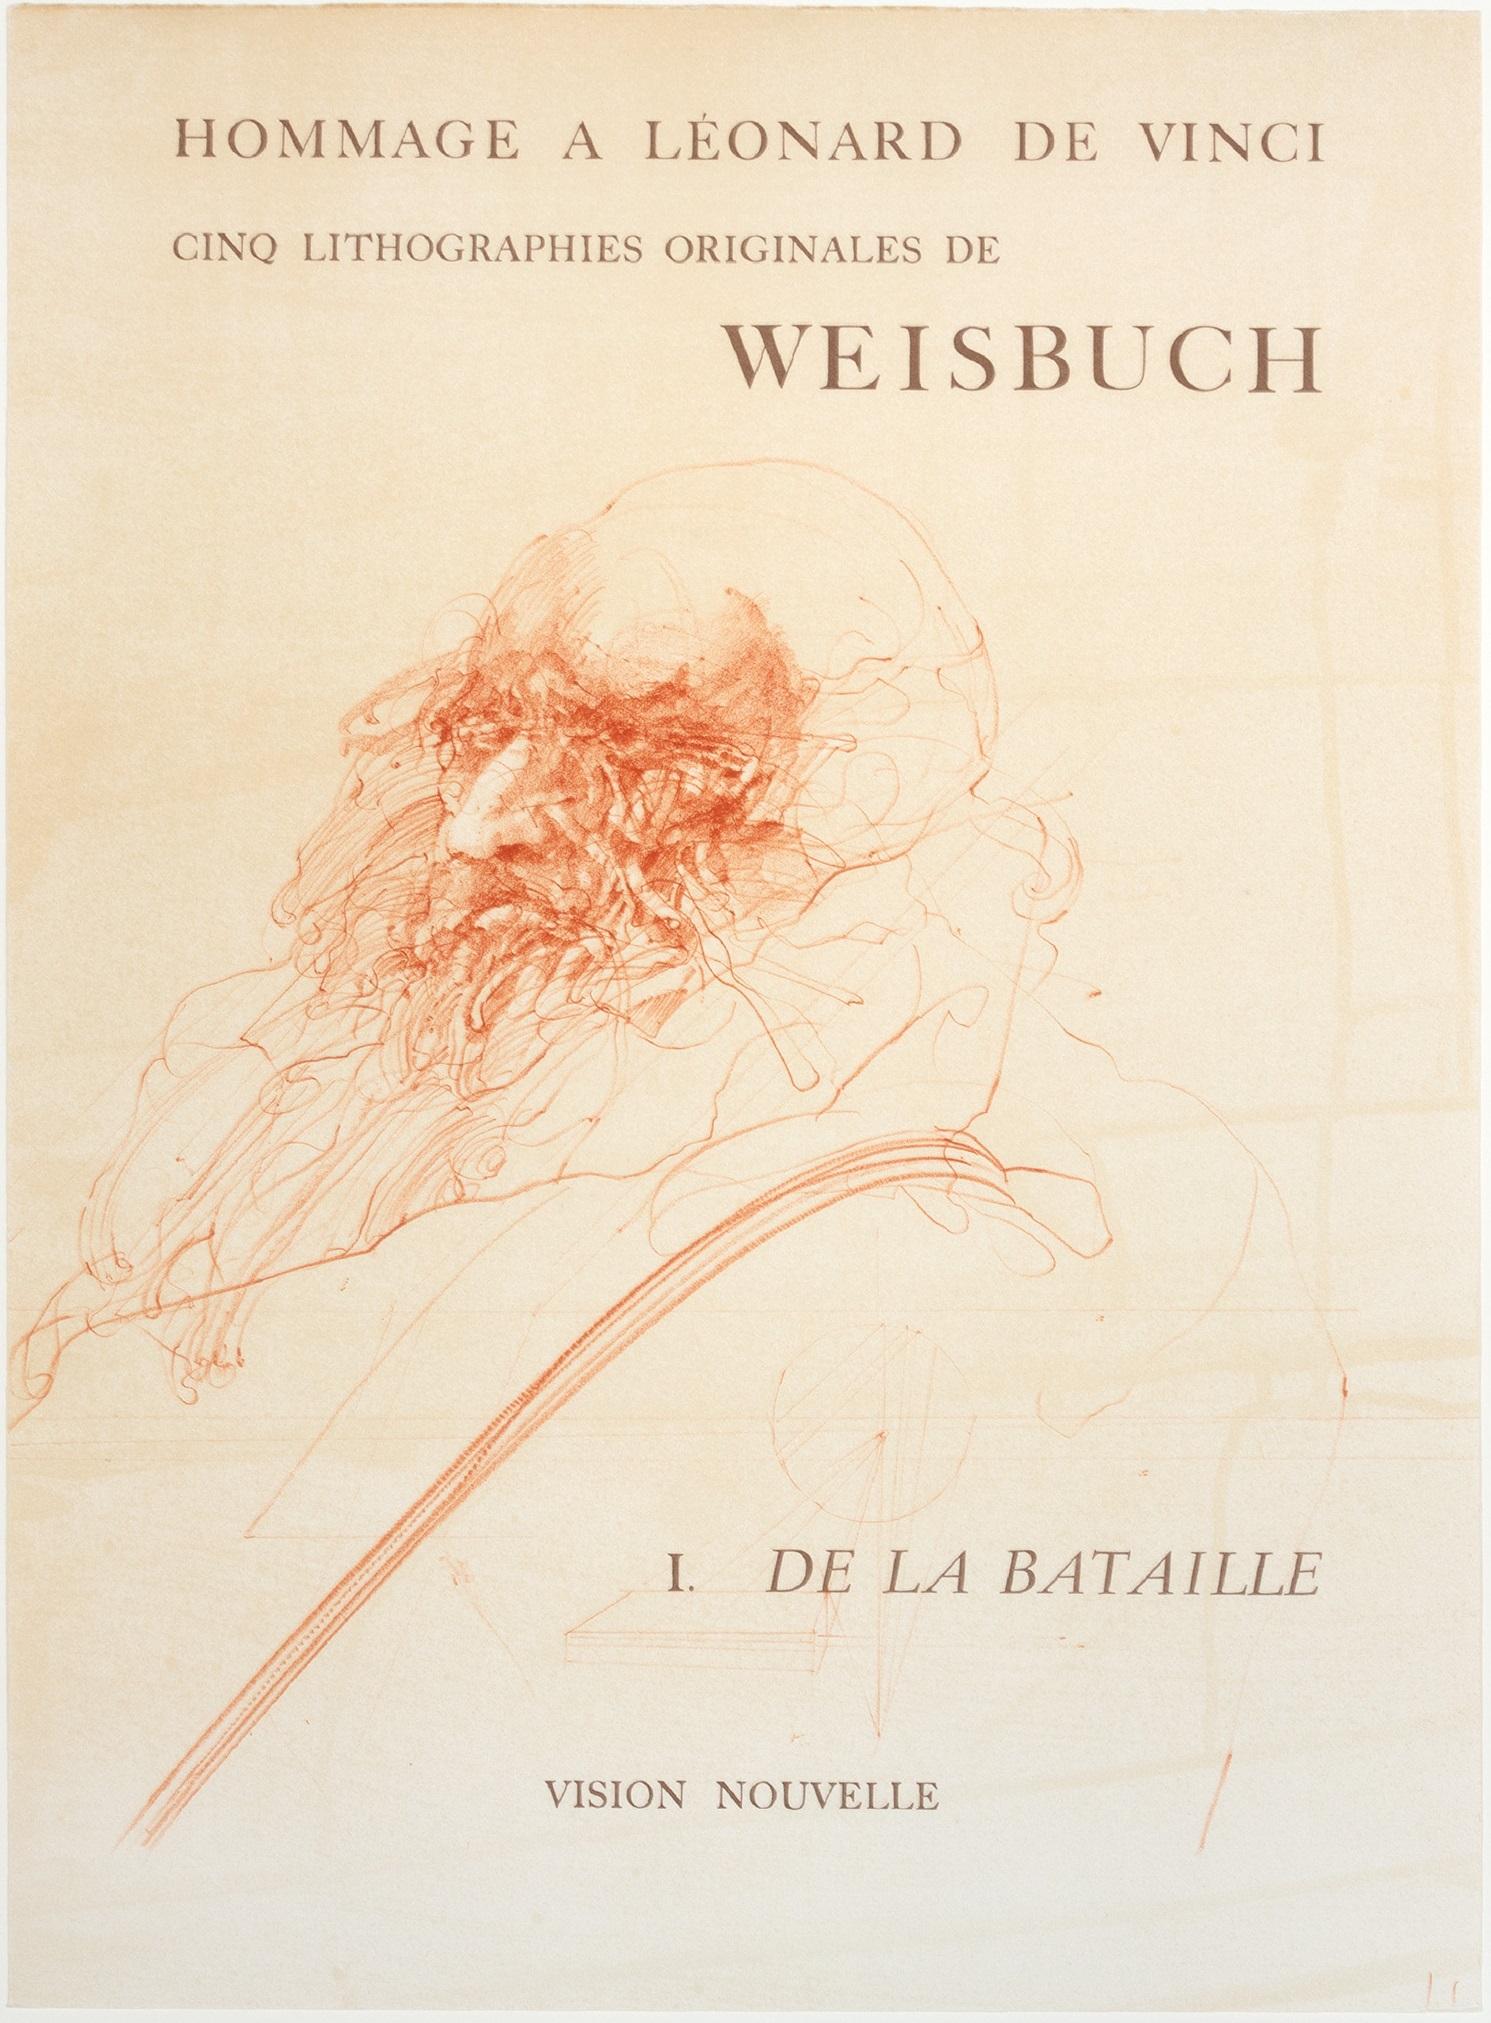 This is an original color lithograph created by Claude Weisbuch. It was designed to promote his show at Vision Nouvelle, a gallery in France. This show in particular was about his Homage to Leonardo De Vinci series.

Art Size: 23 1/4